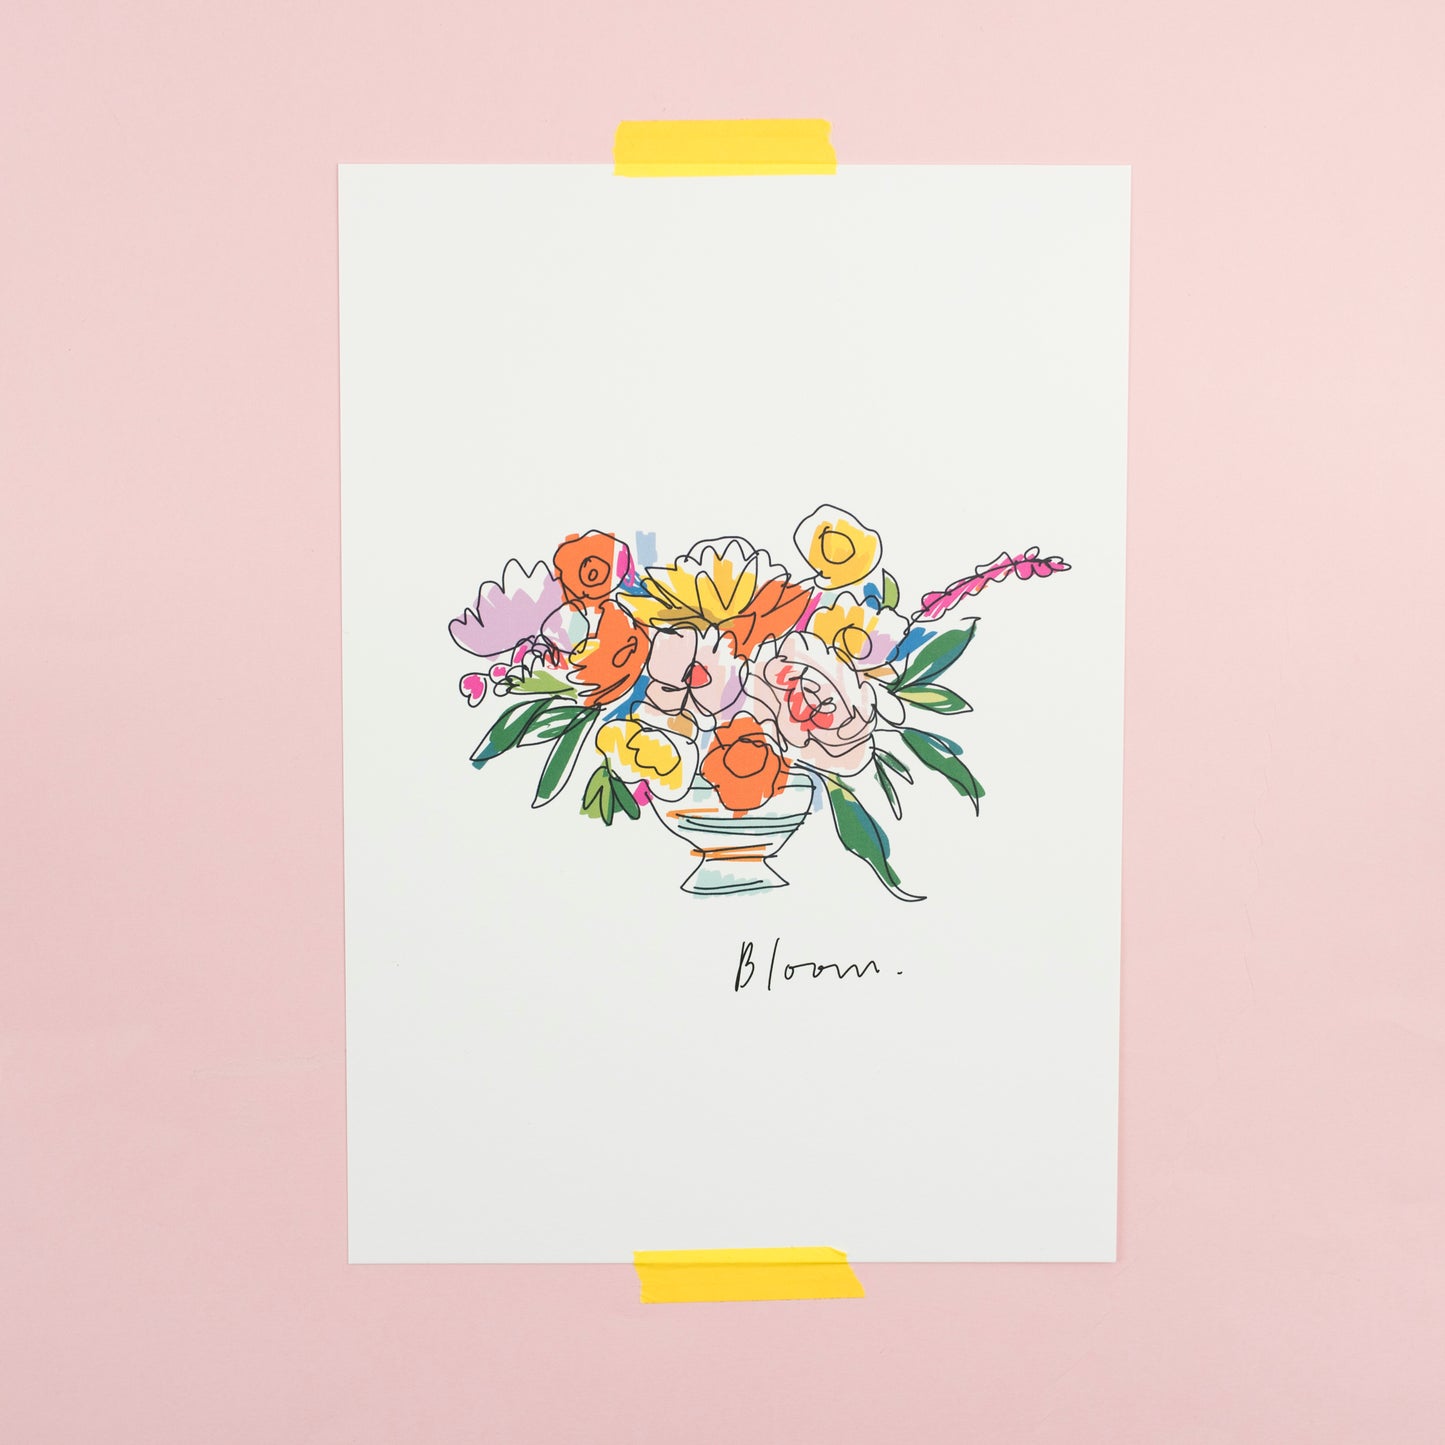 Floral Print - bloom/bloom and grow A4 print